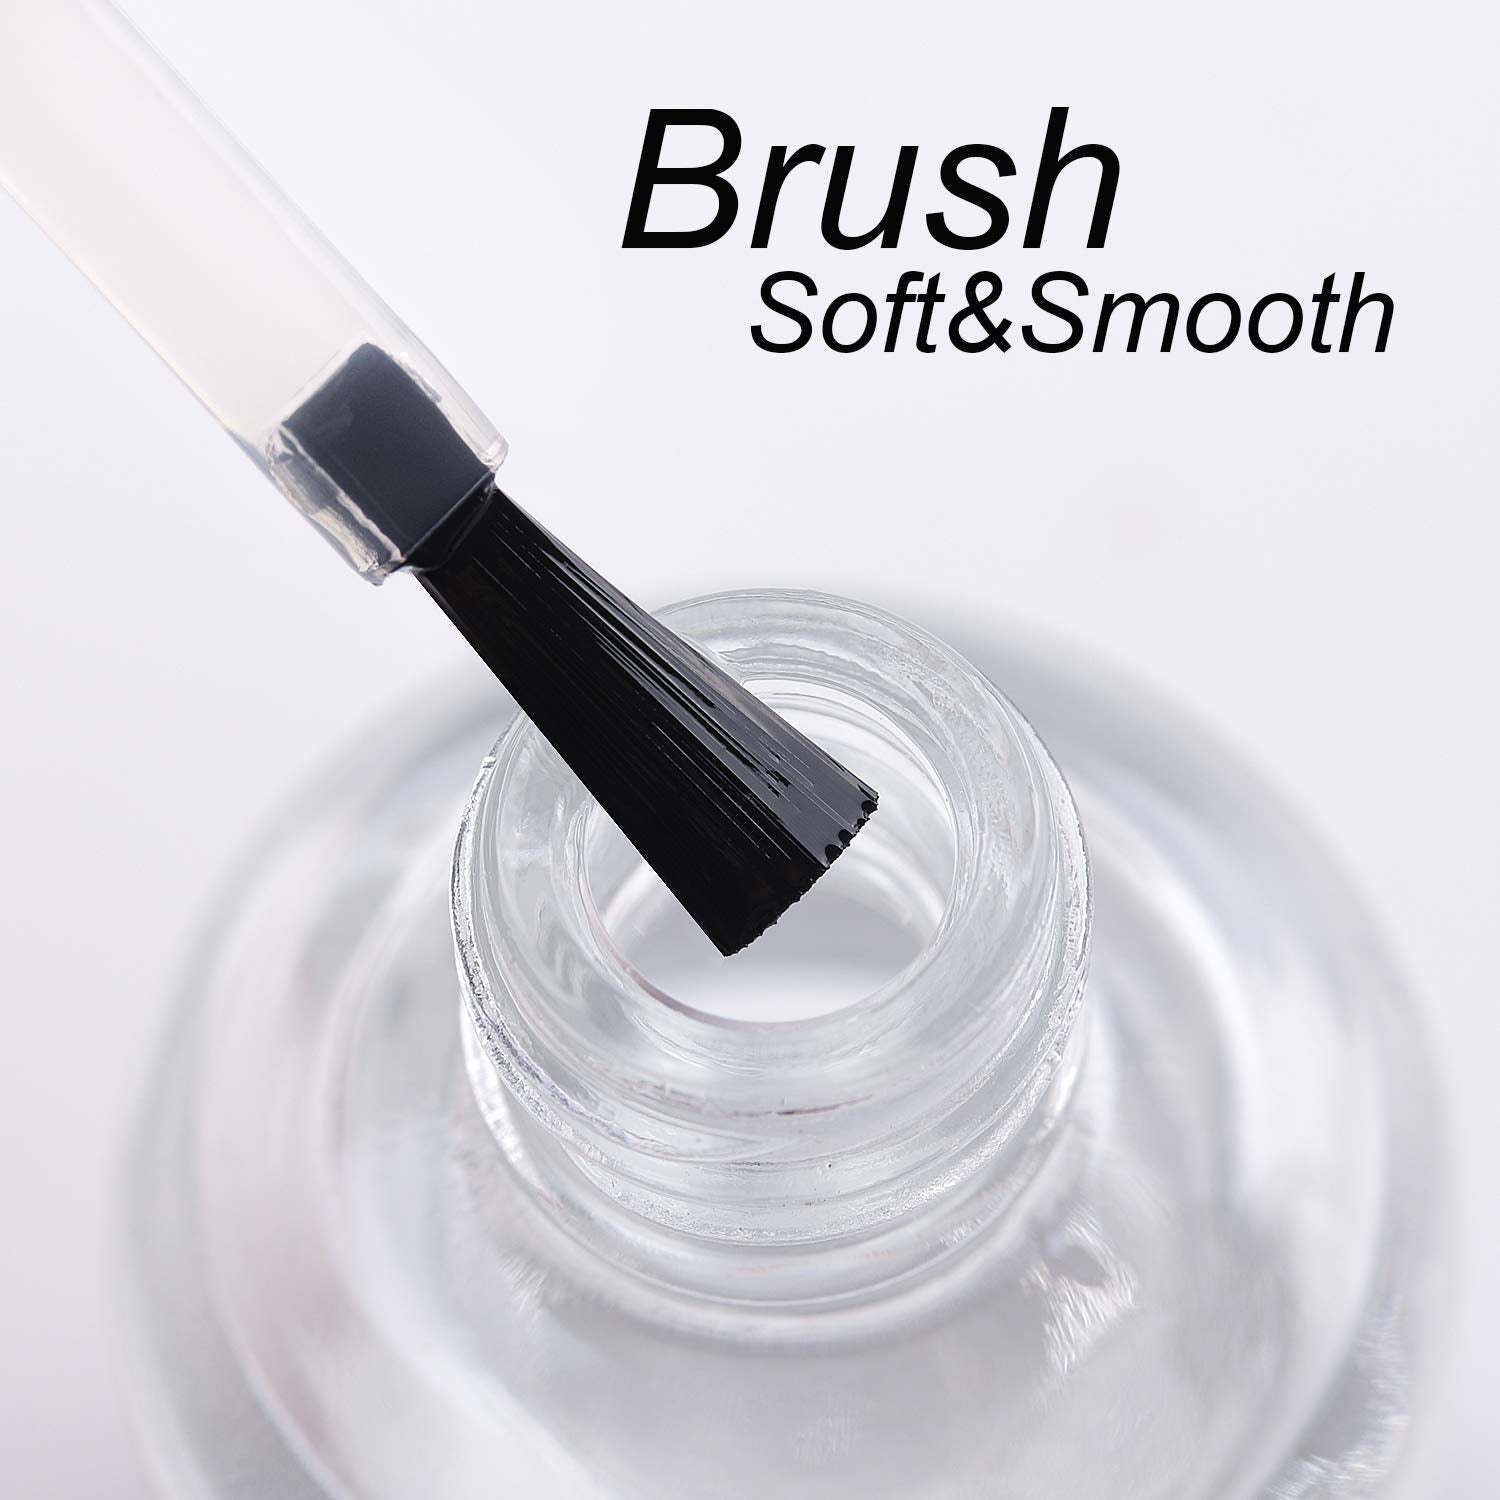 Buy Dip Powder replacement Liquid Brush 10pcs/set For Dipping Powder Base  Coat/Top Coat/Activator Brushes Online at Low Prices in India - Amazon.in